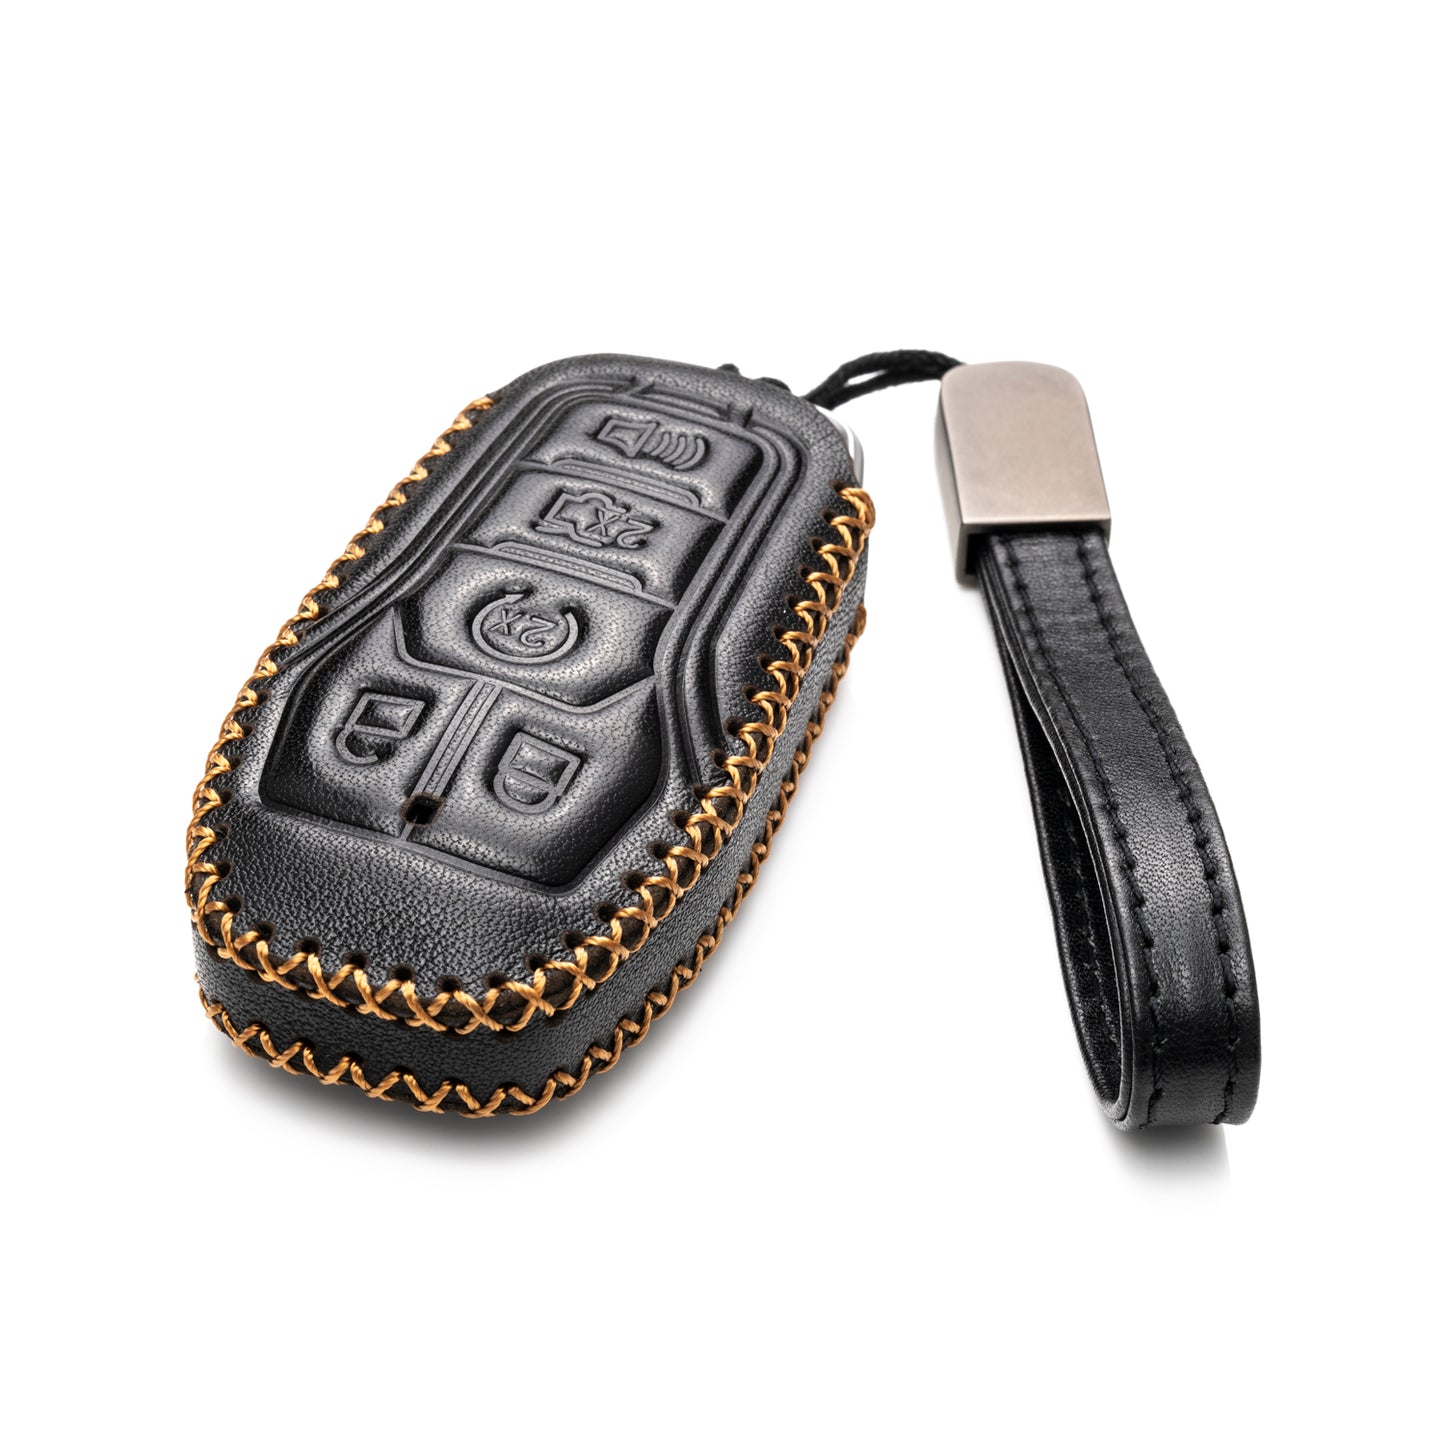 Vitodeco 5-Button Genuine Leather Smart Key Fob Case Cover Protector Compatible for Ford Fusion, Explorer, Escape, Edge, F-150, Mustang 2015-2017 and More Models